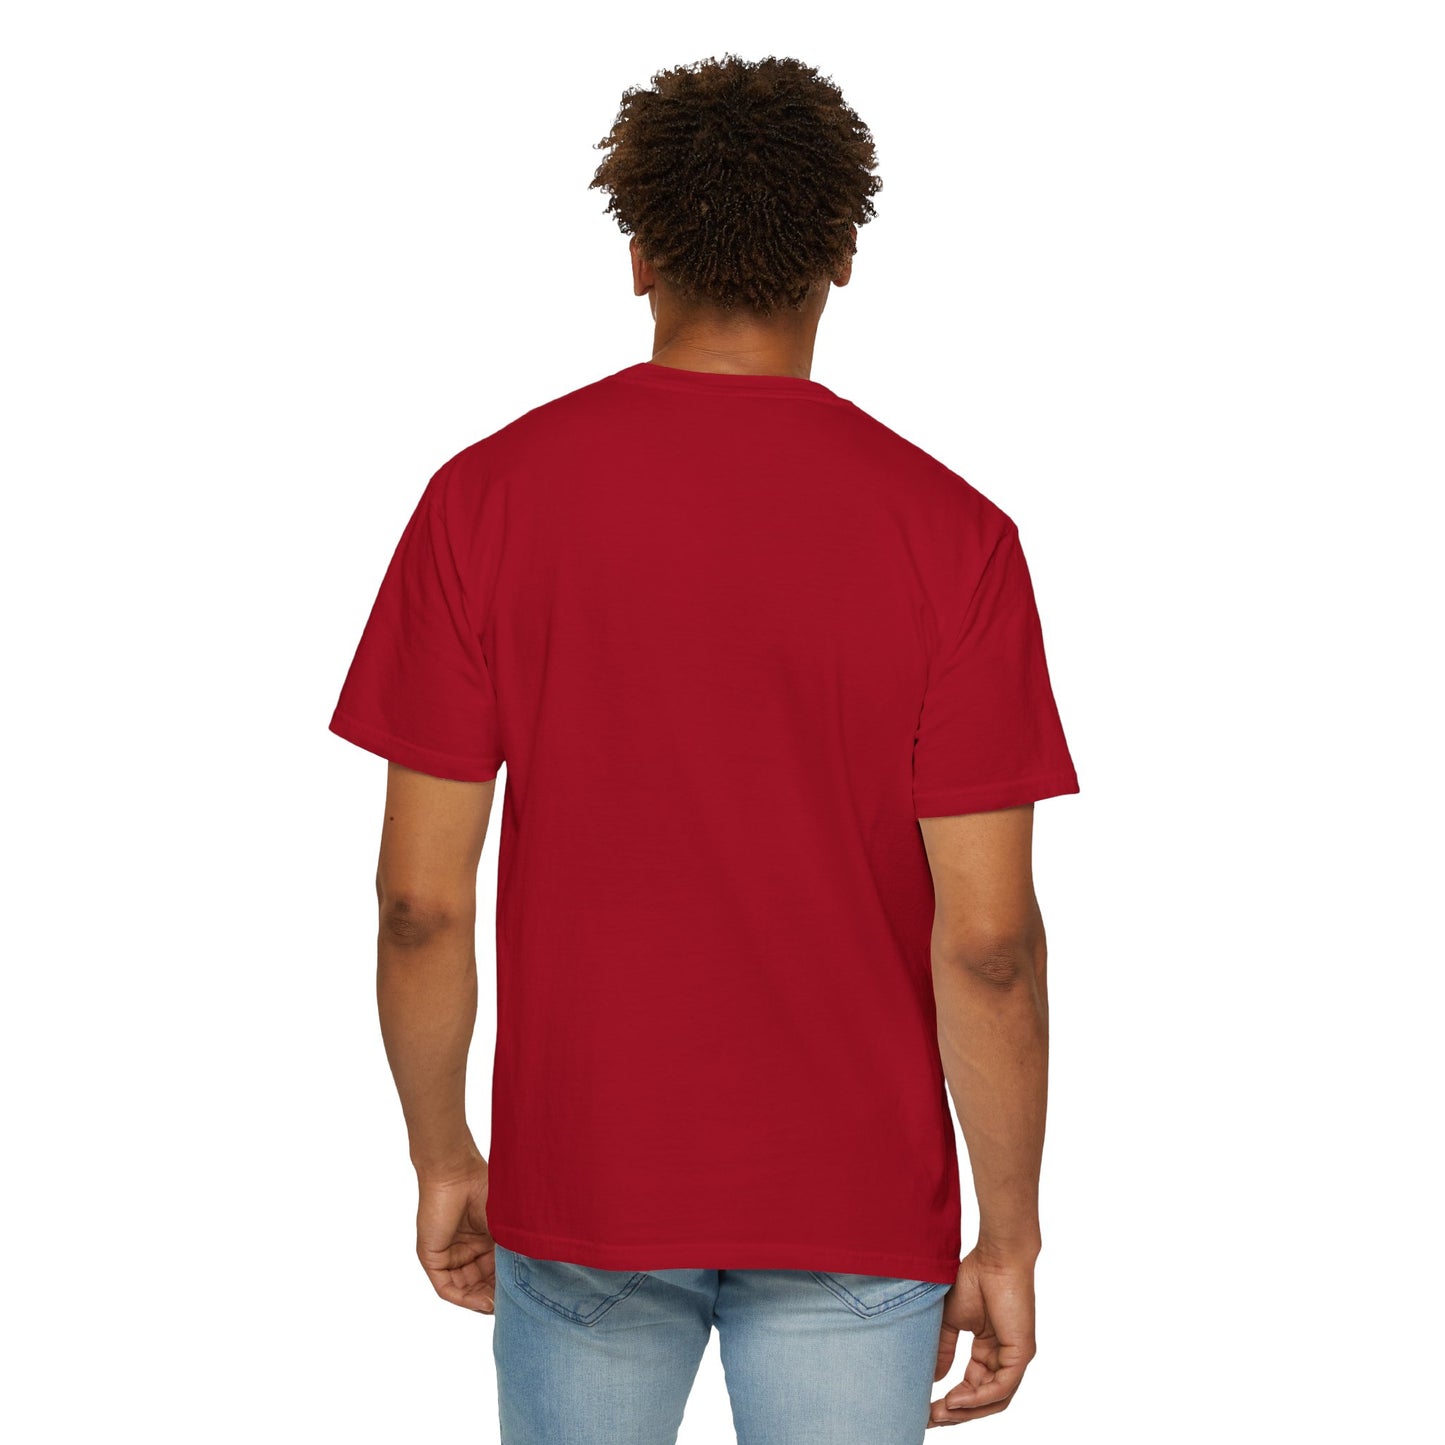 Father and Son forever: Unisex Garment-Dyed T-shirt